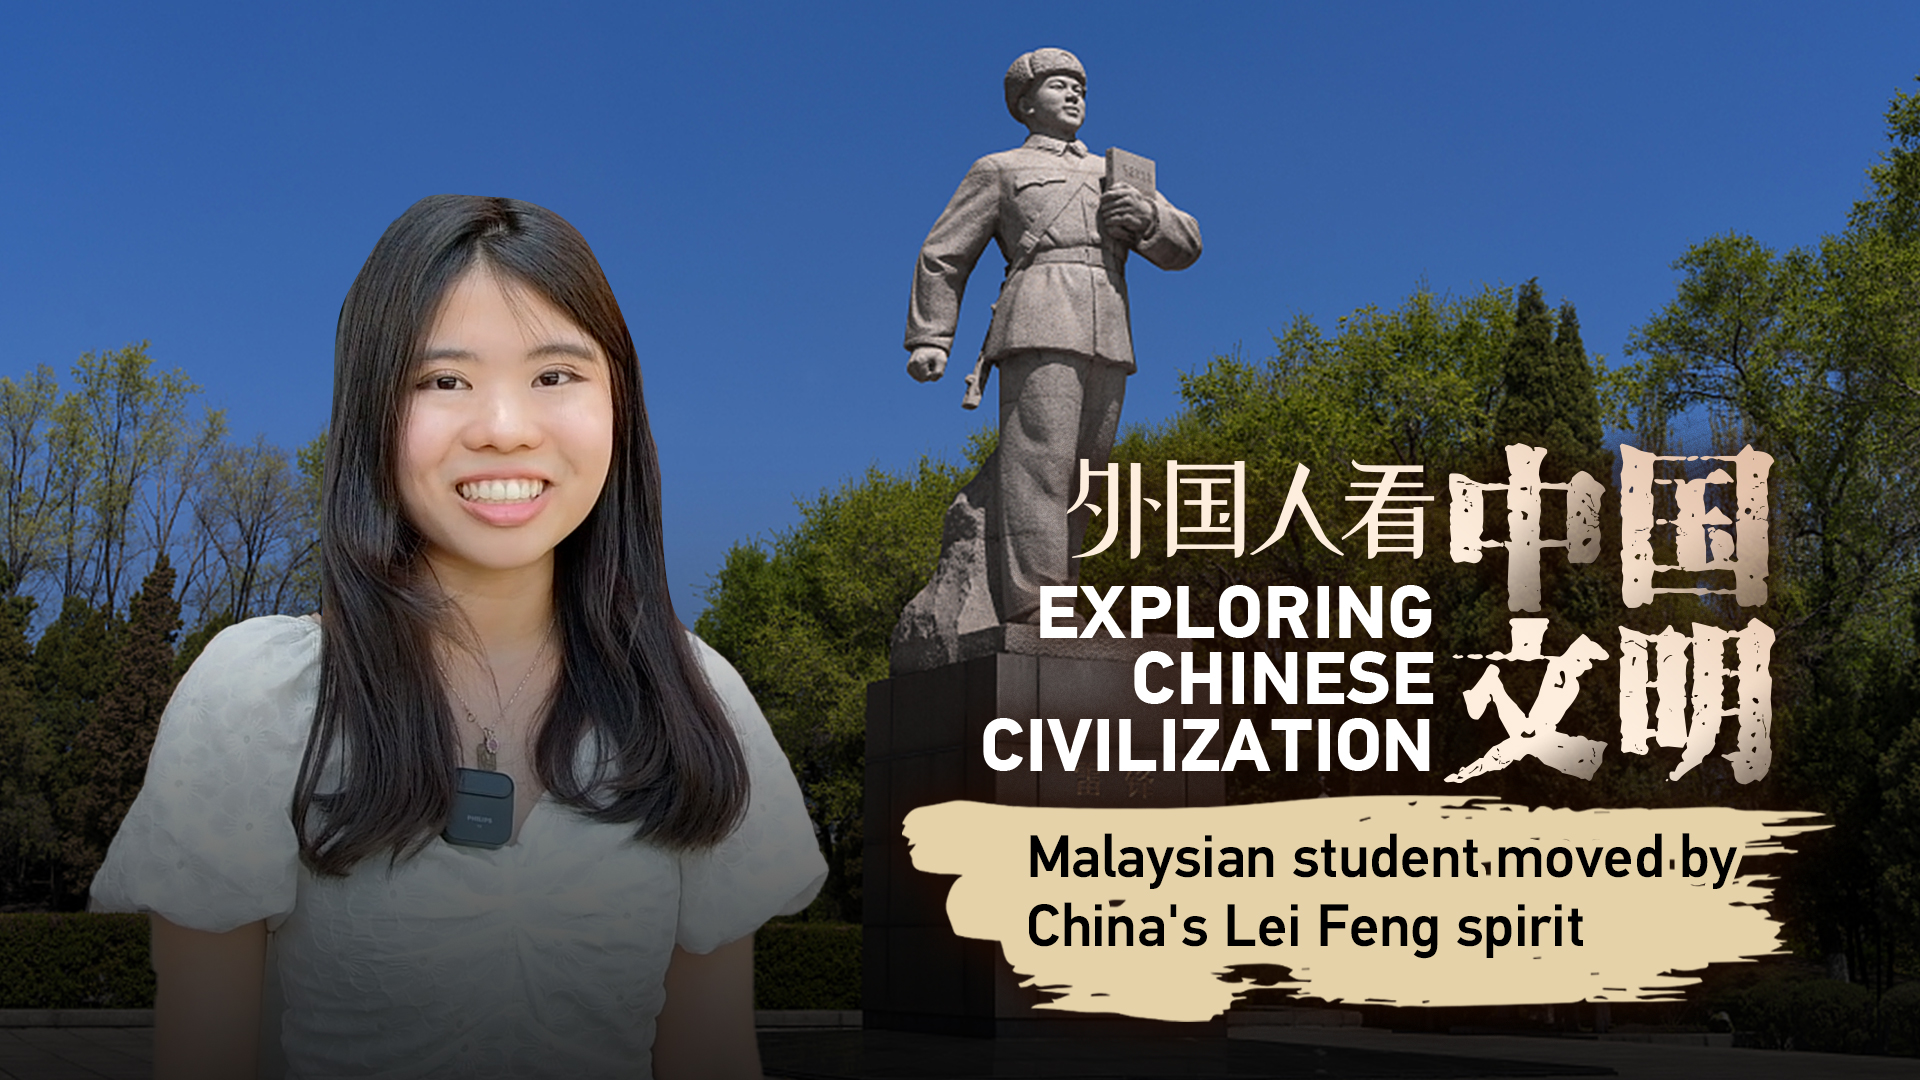 Malaysian student moved by China's Lei Feng spirit 